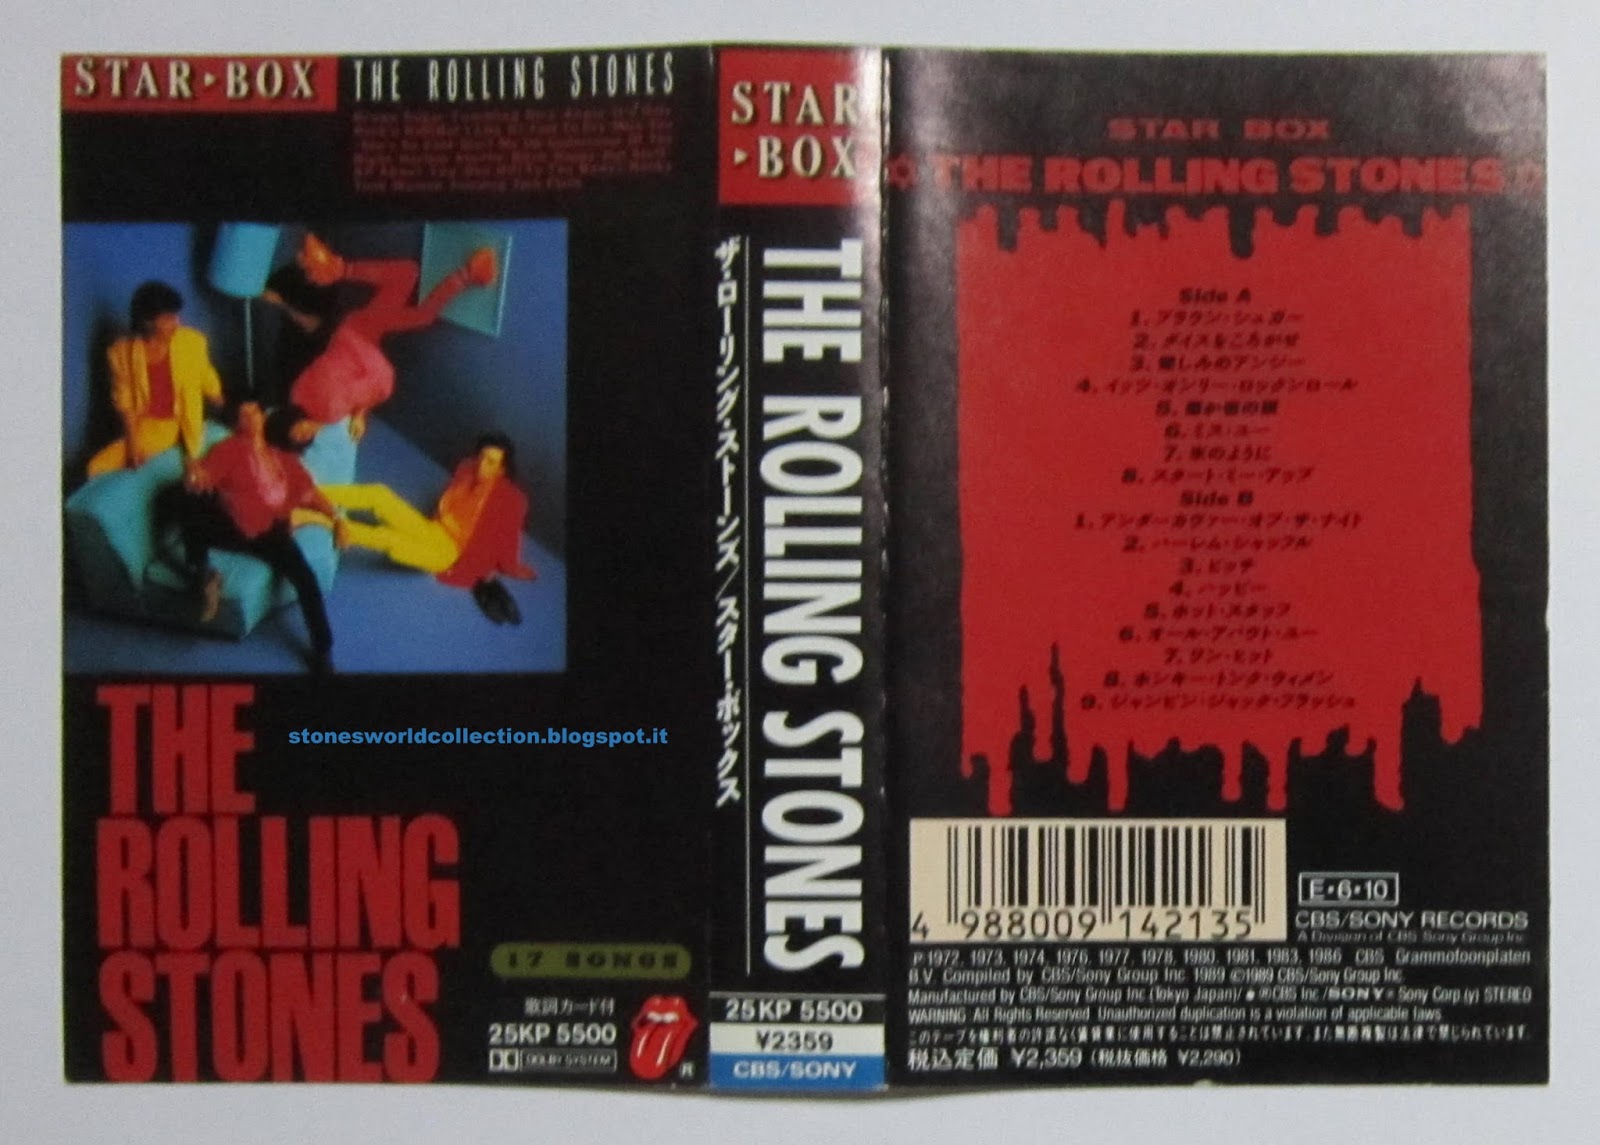 STONESWORLDCOLLECTION : The Rolling Stones Star Box ( 1989 Japan Cbs Sony  25 KP 5500 Original Issue Same Cd ) Note : Special Shaped Case ( Snap Type  ) With Fold-Out Insert Japan  Inglish Lyrics